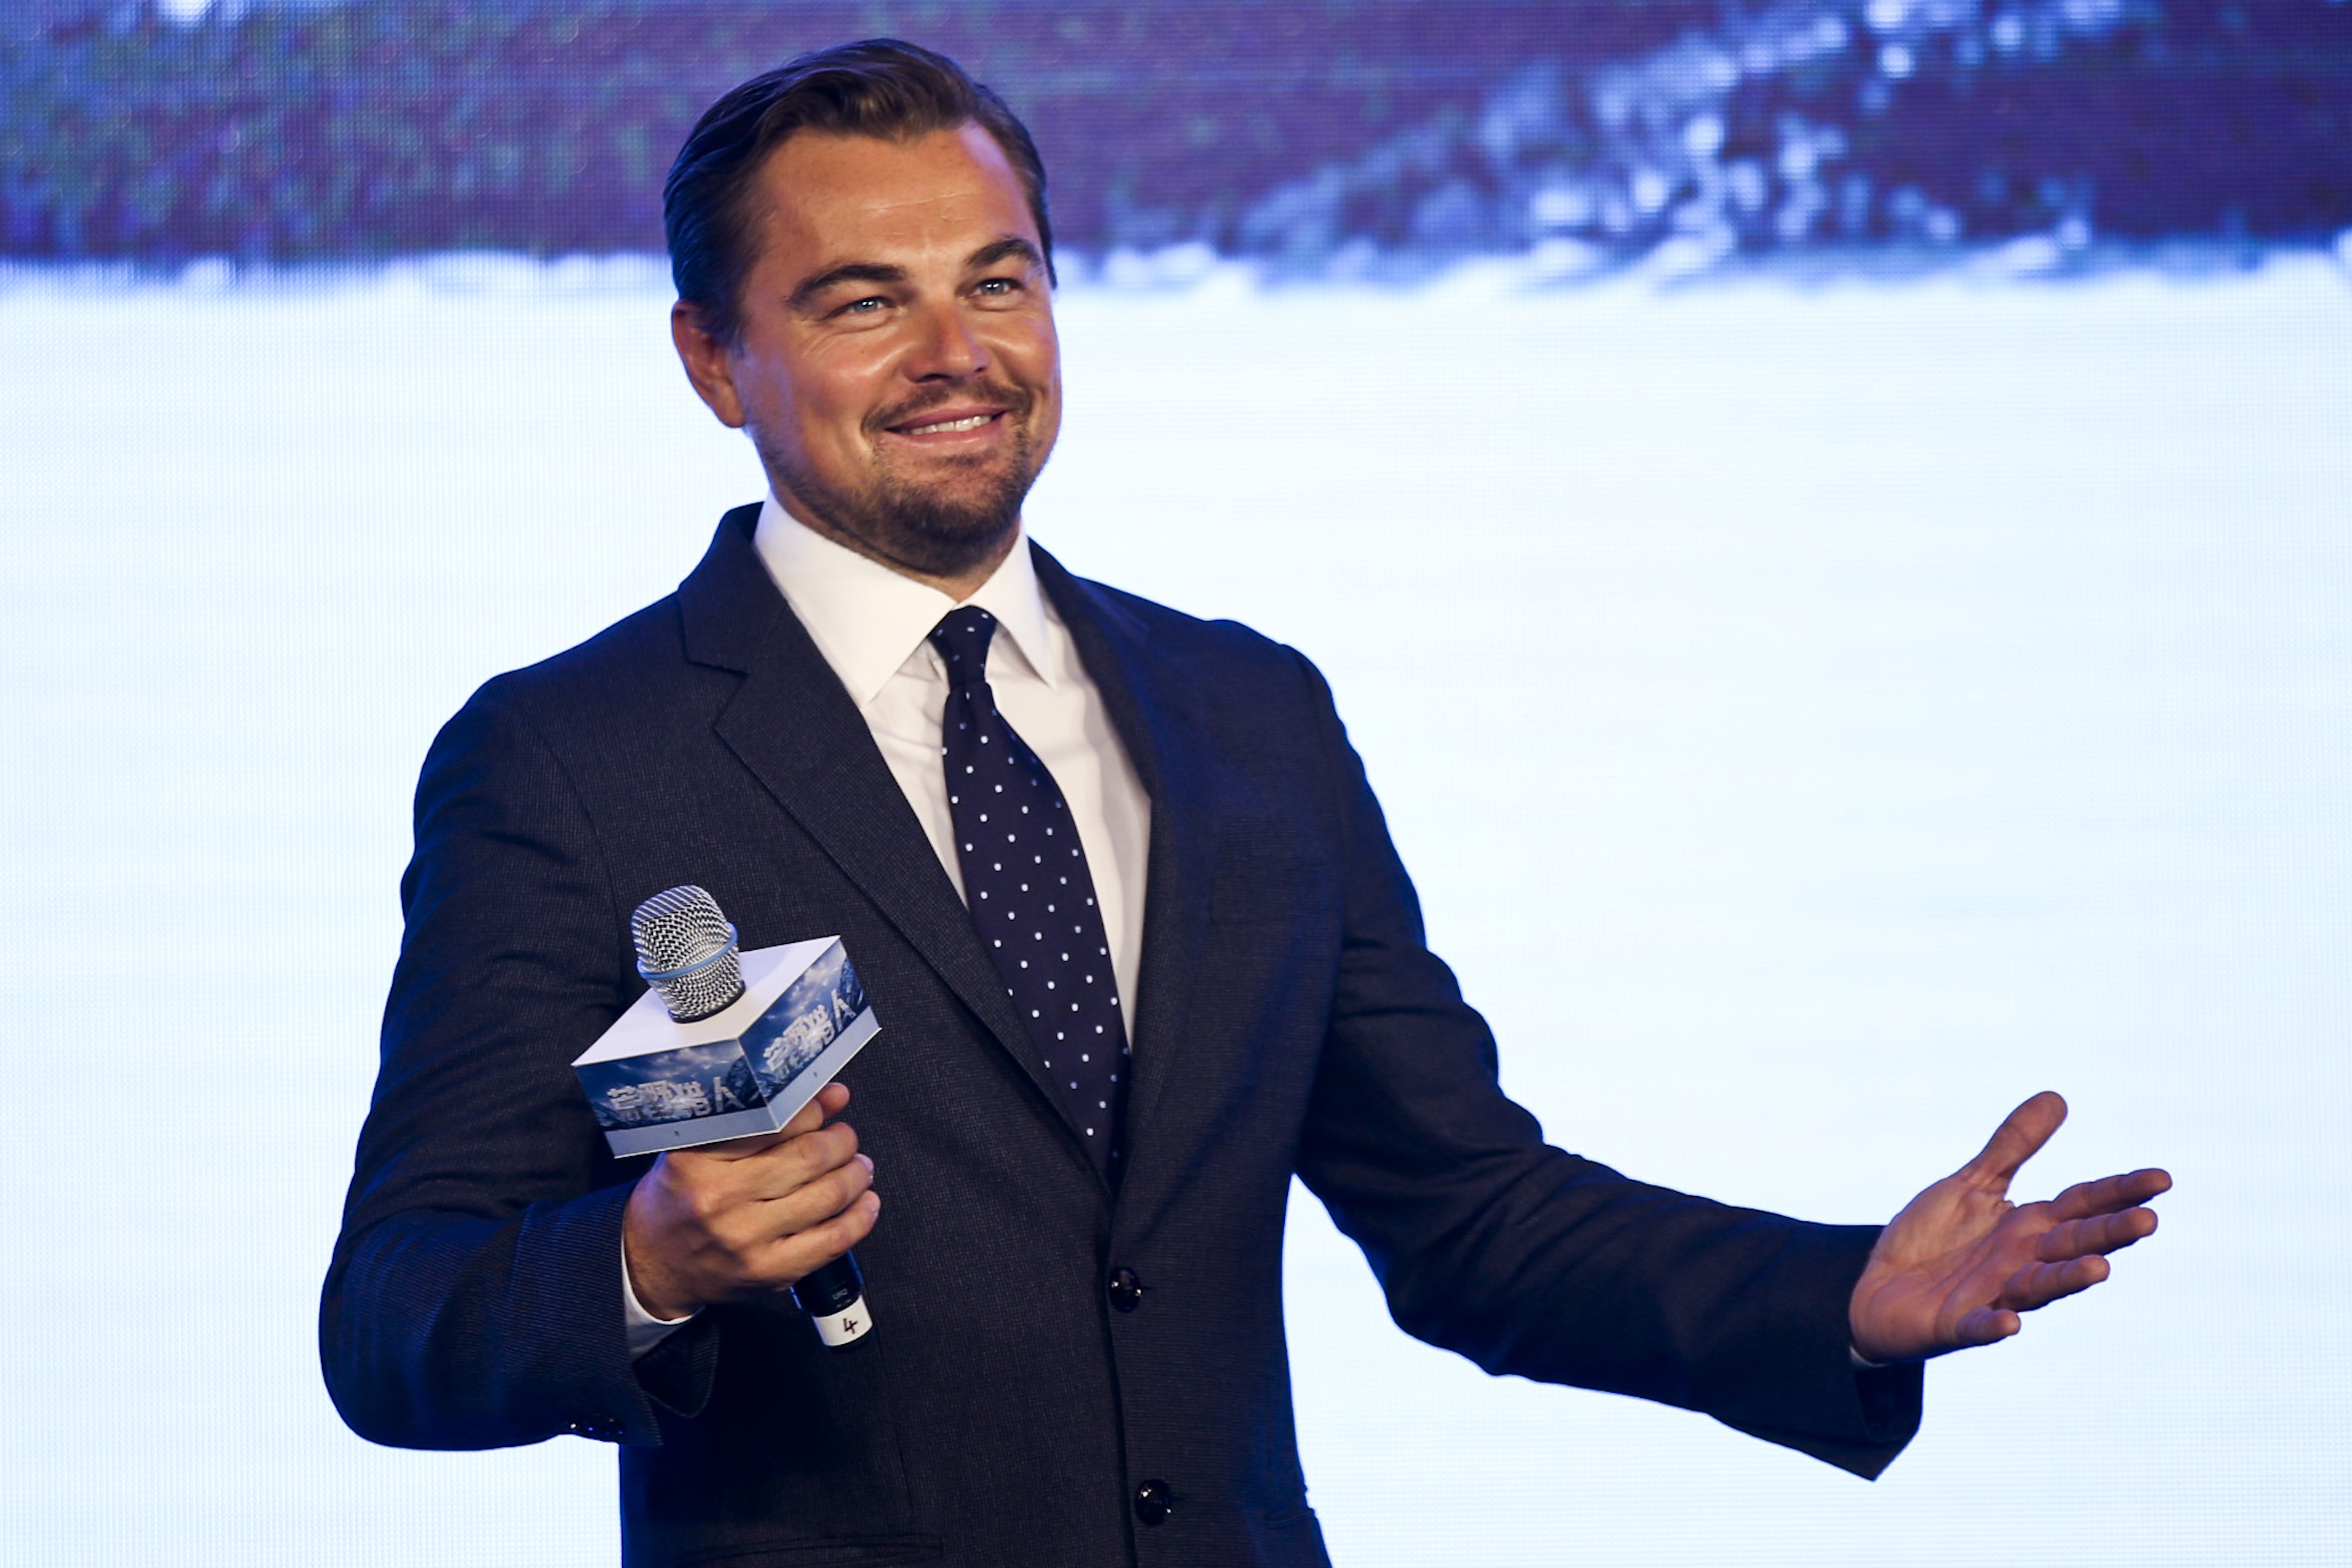 BEIJING, CHINA - MARCH 20:  (CHINA OUT) Actor Leonardo DiCaprio attends a press conference of new movie "The Revenant" on March 20, 2016 in Beijing, China.  (Photo by VCG/VCG via Getty Images) (VCG — Getty Images)